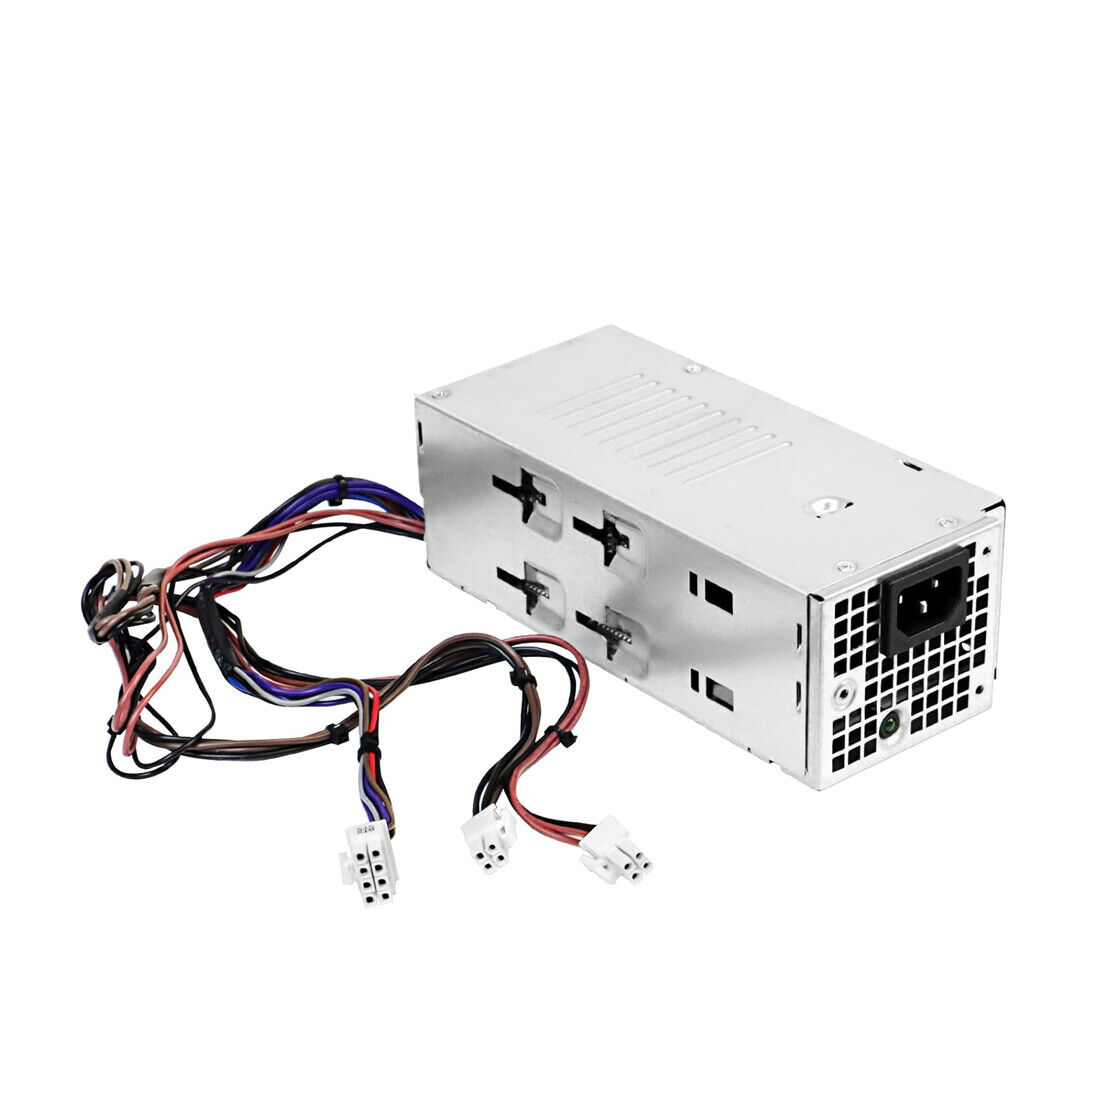 New AC240EBS-00 PCL008 240W Power Supply For Dell Optiplex 3900MT 3901MT 3990MT